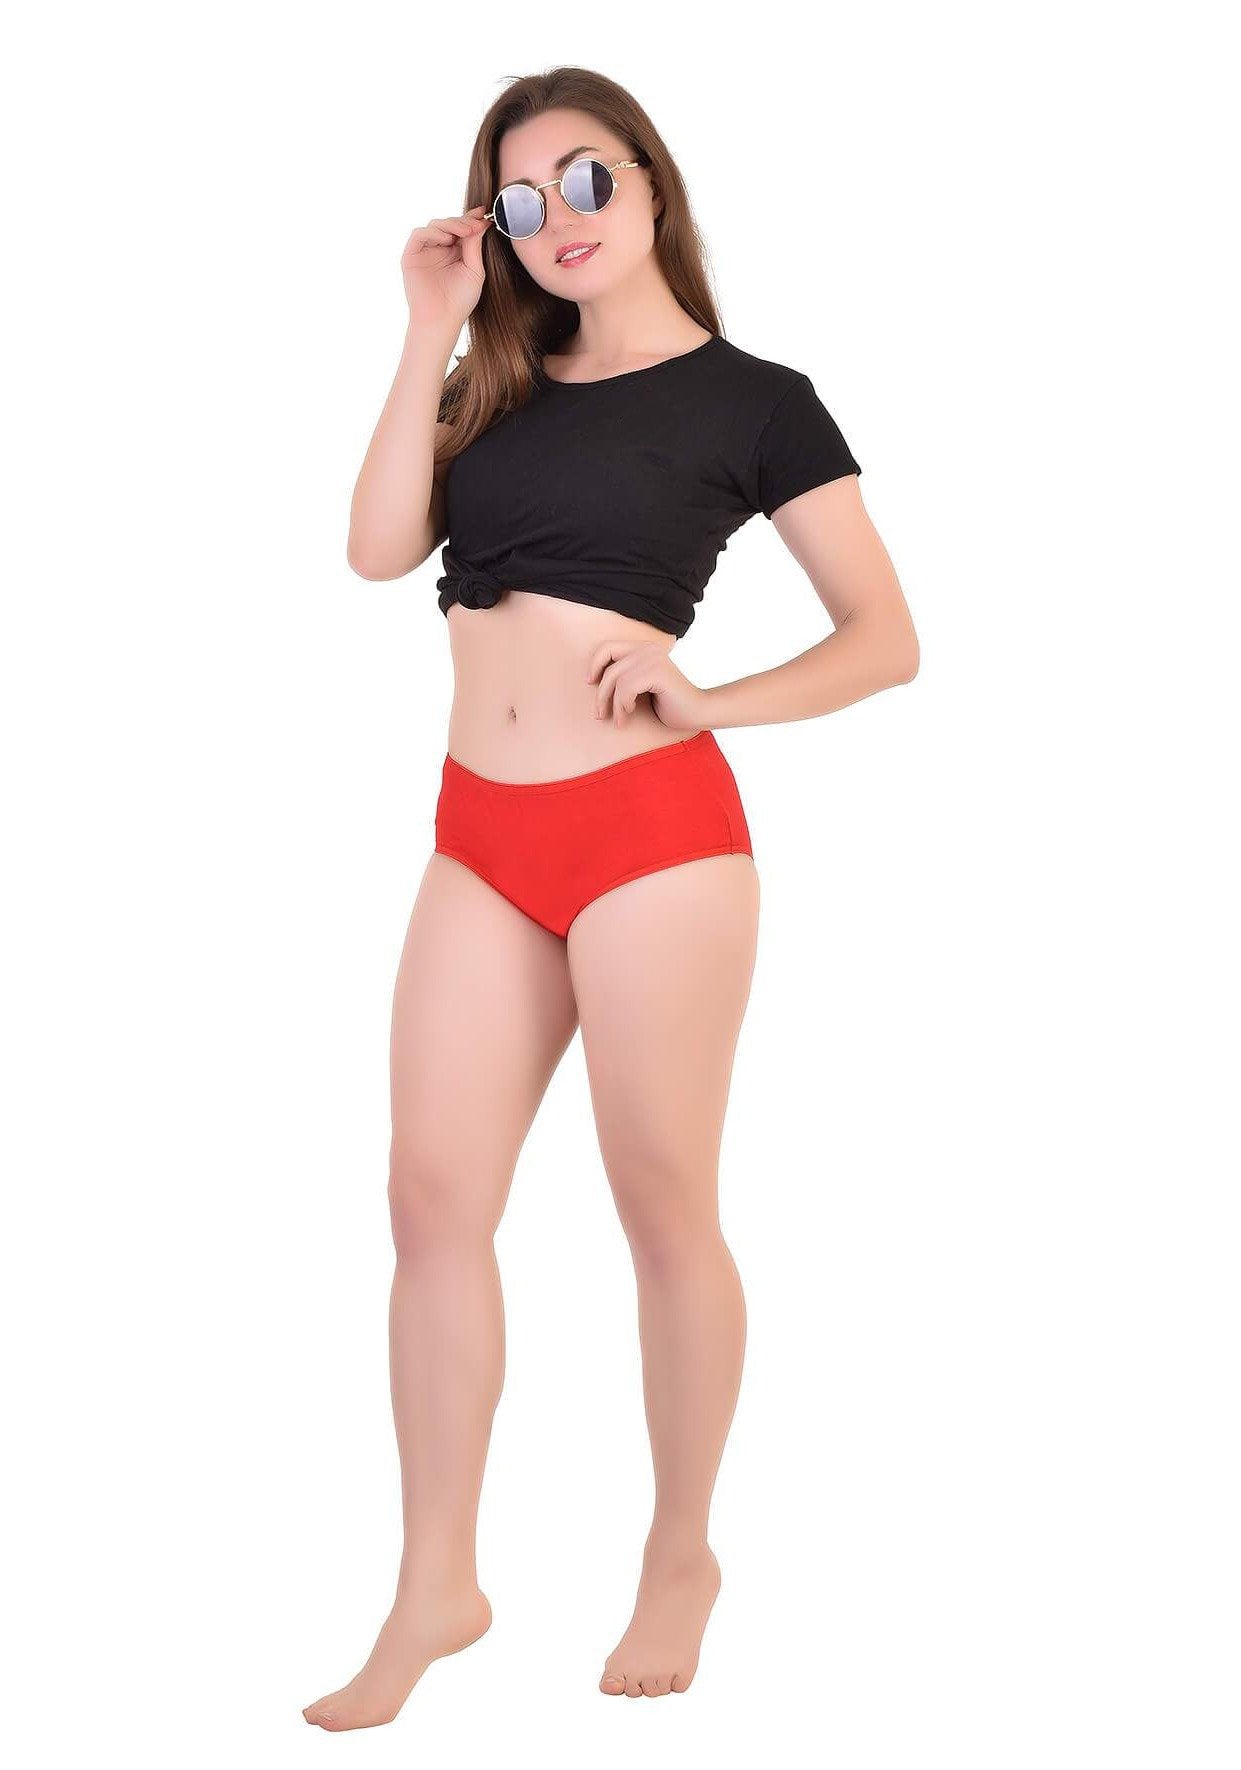 Bamboo Fabric Mid Waist Panty Pack of 2